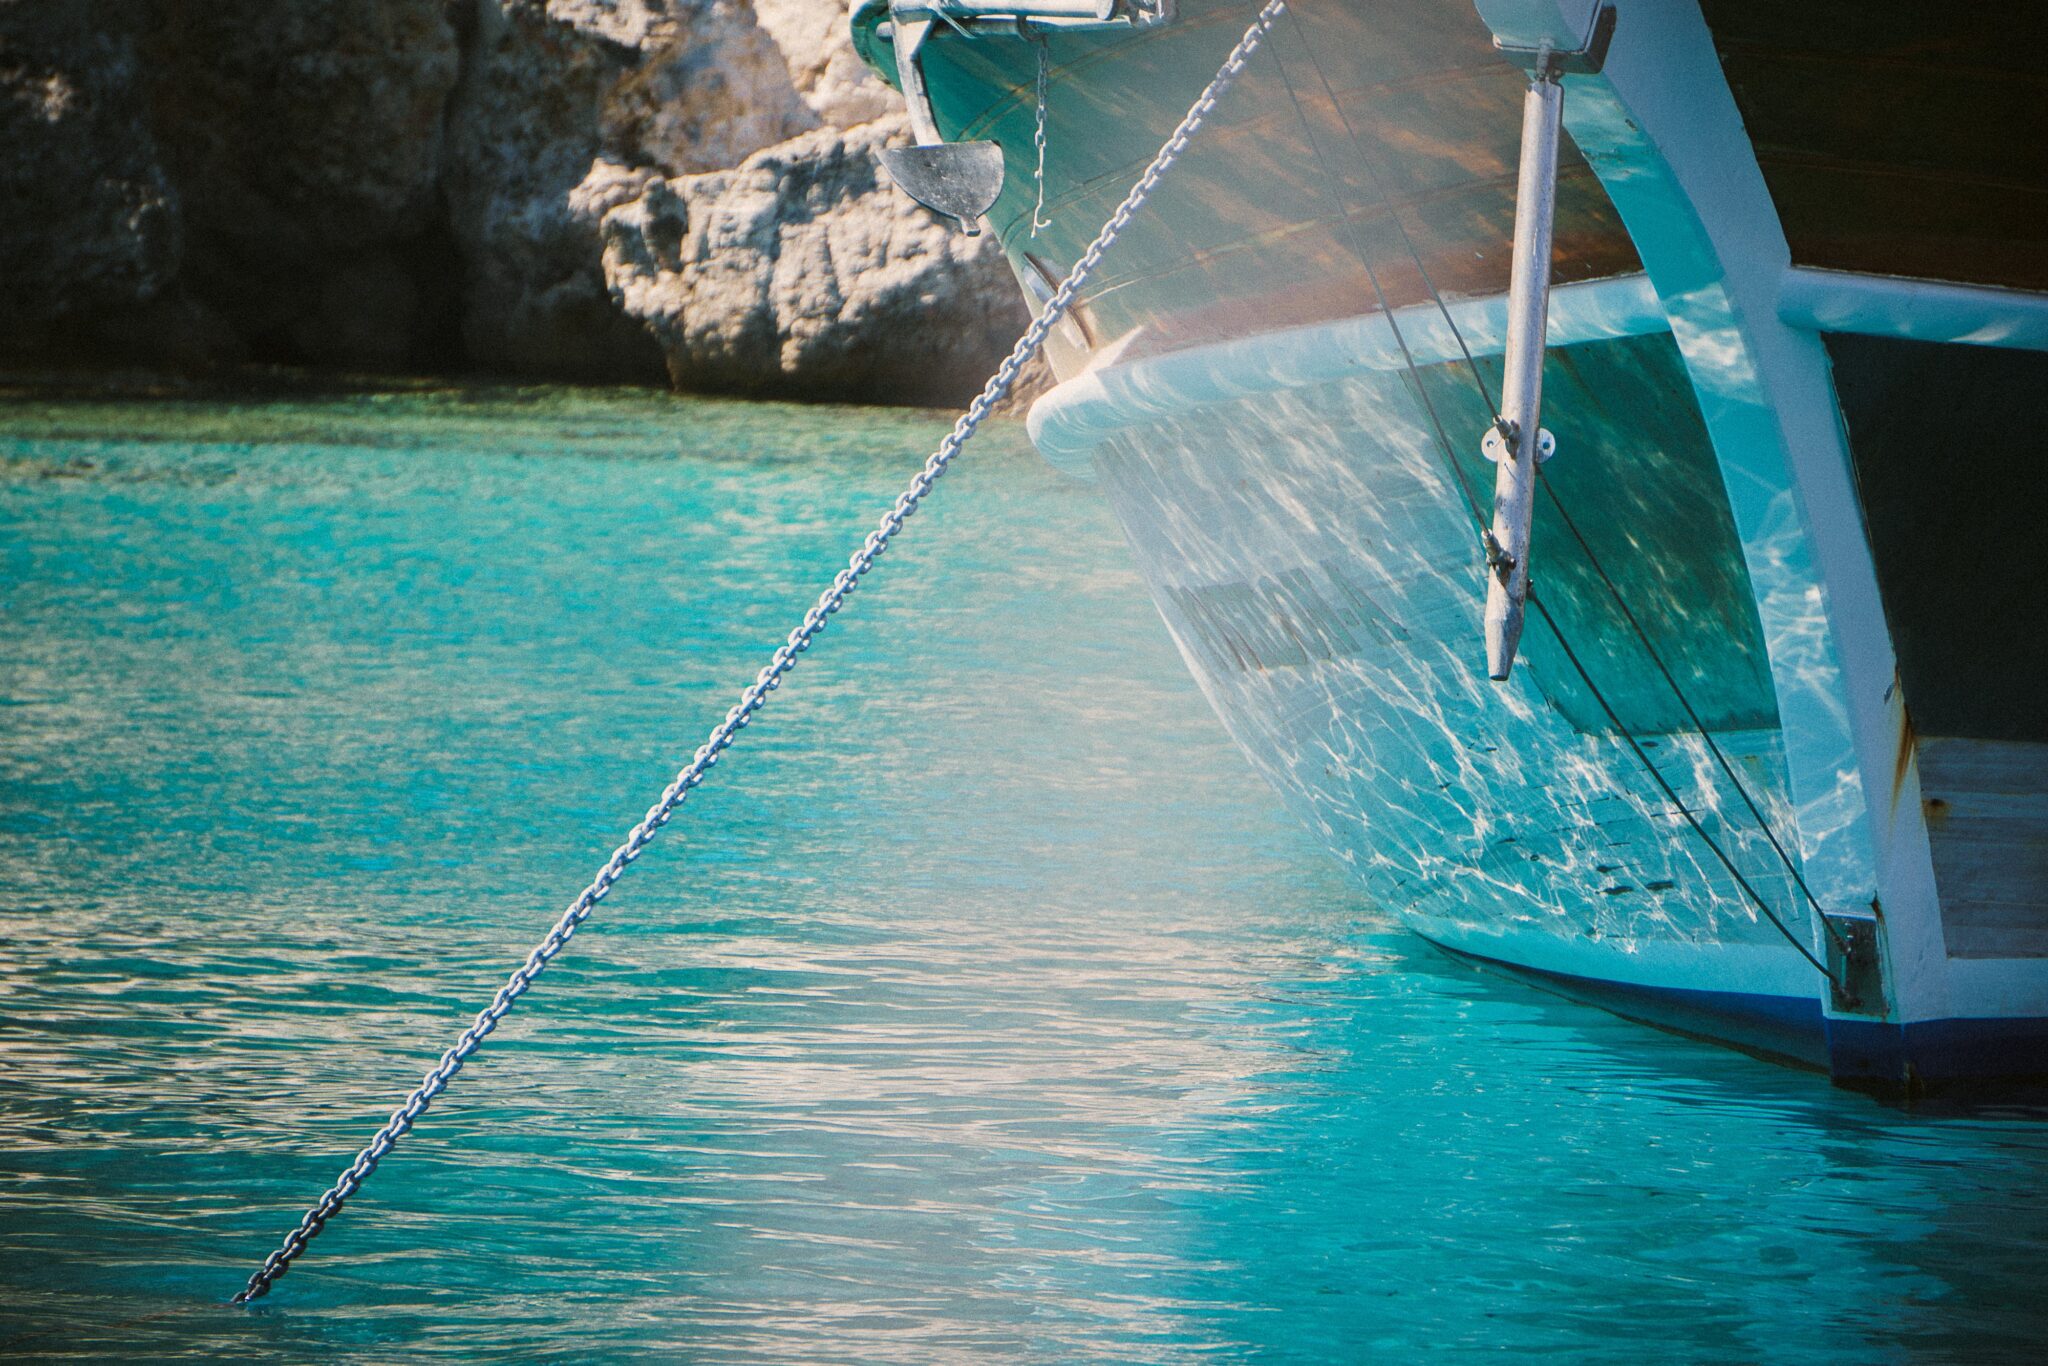 Anchored boat in blue water